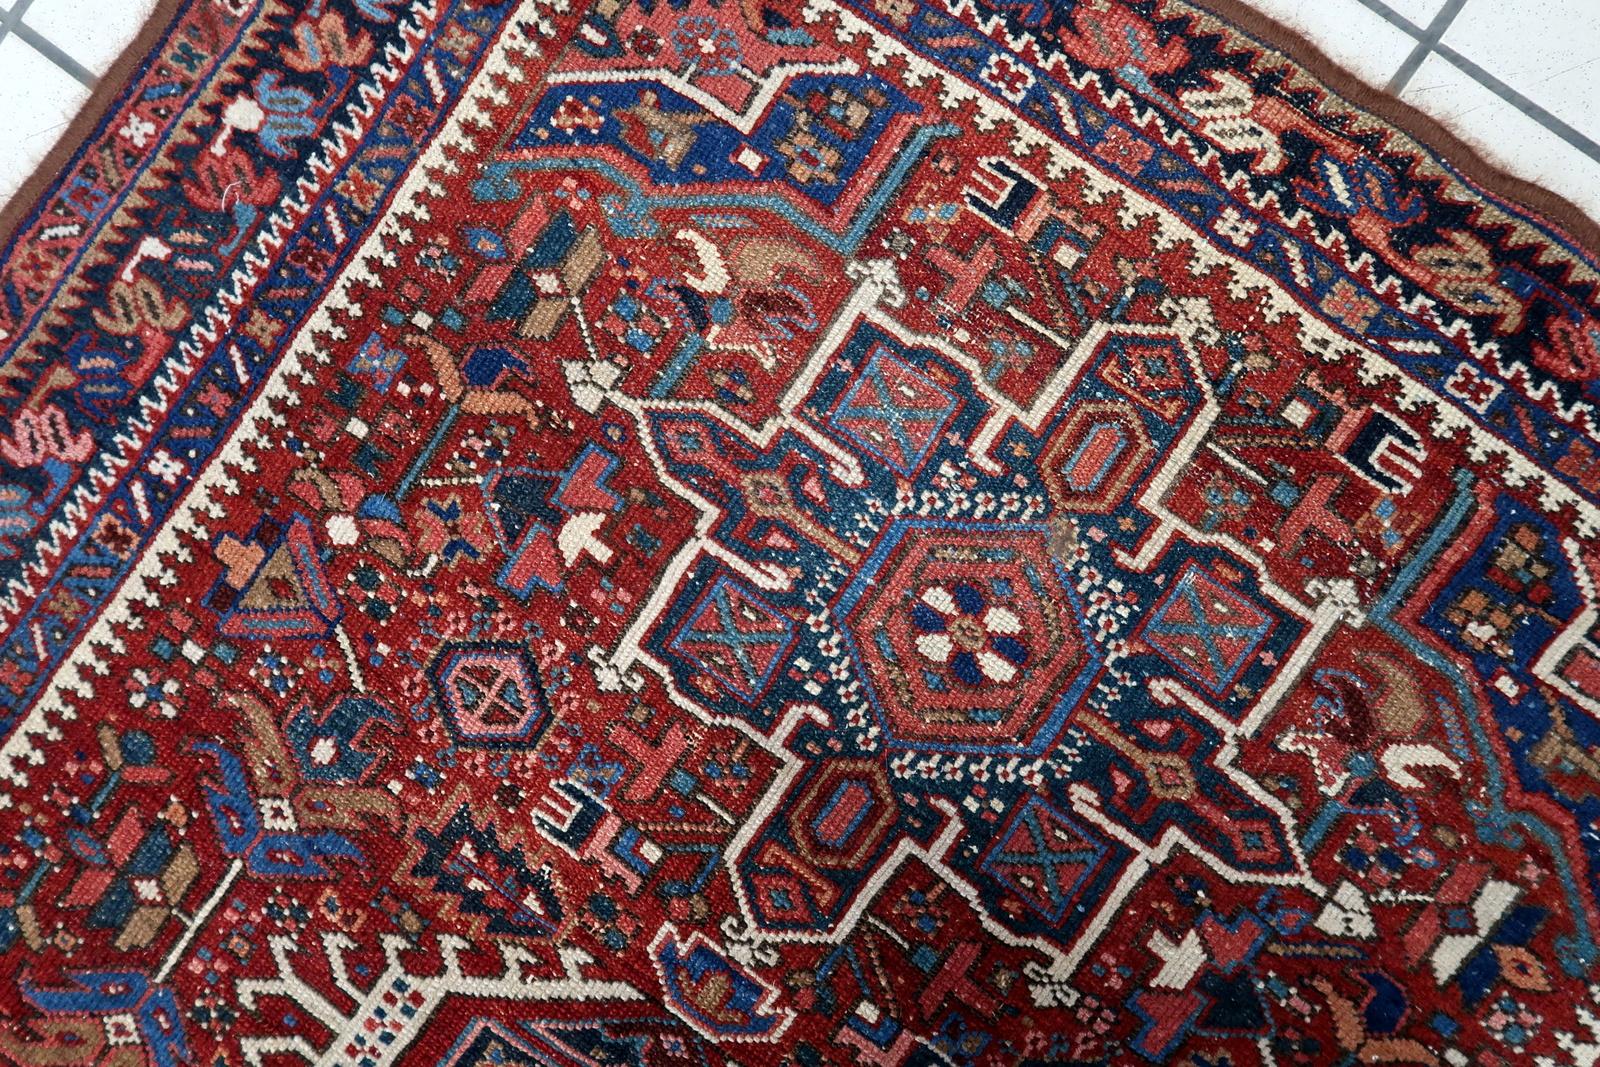 Hand-Knotted Handmade Antique Persian Style Hamadan Rug 3.4' x 4.2', 1930s - 1C1123 For Sale